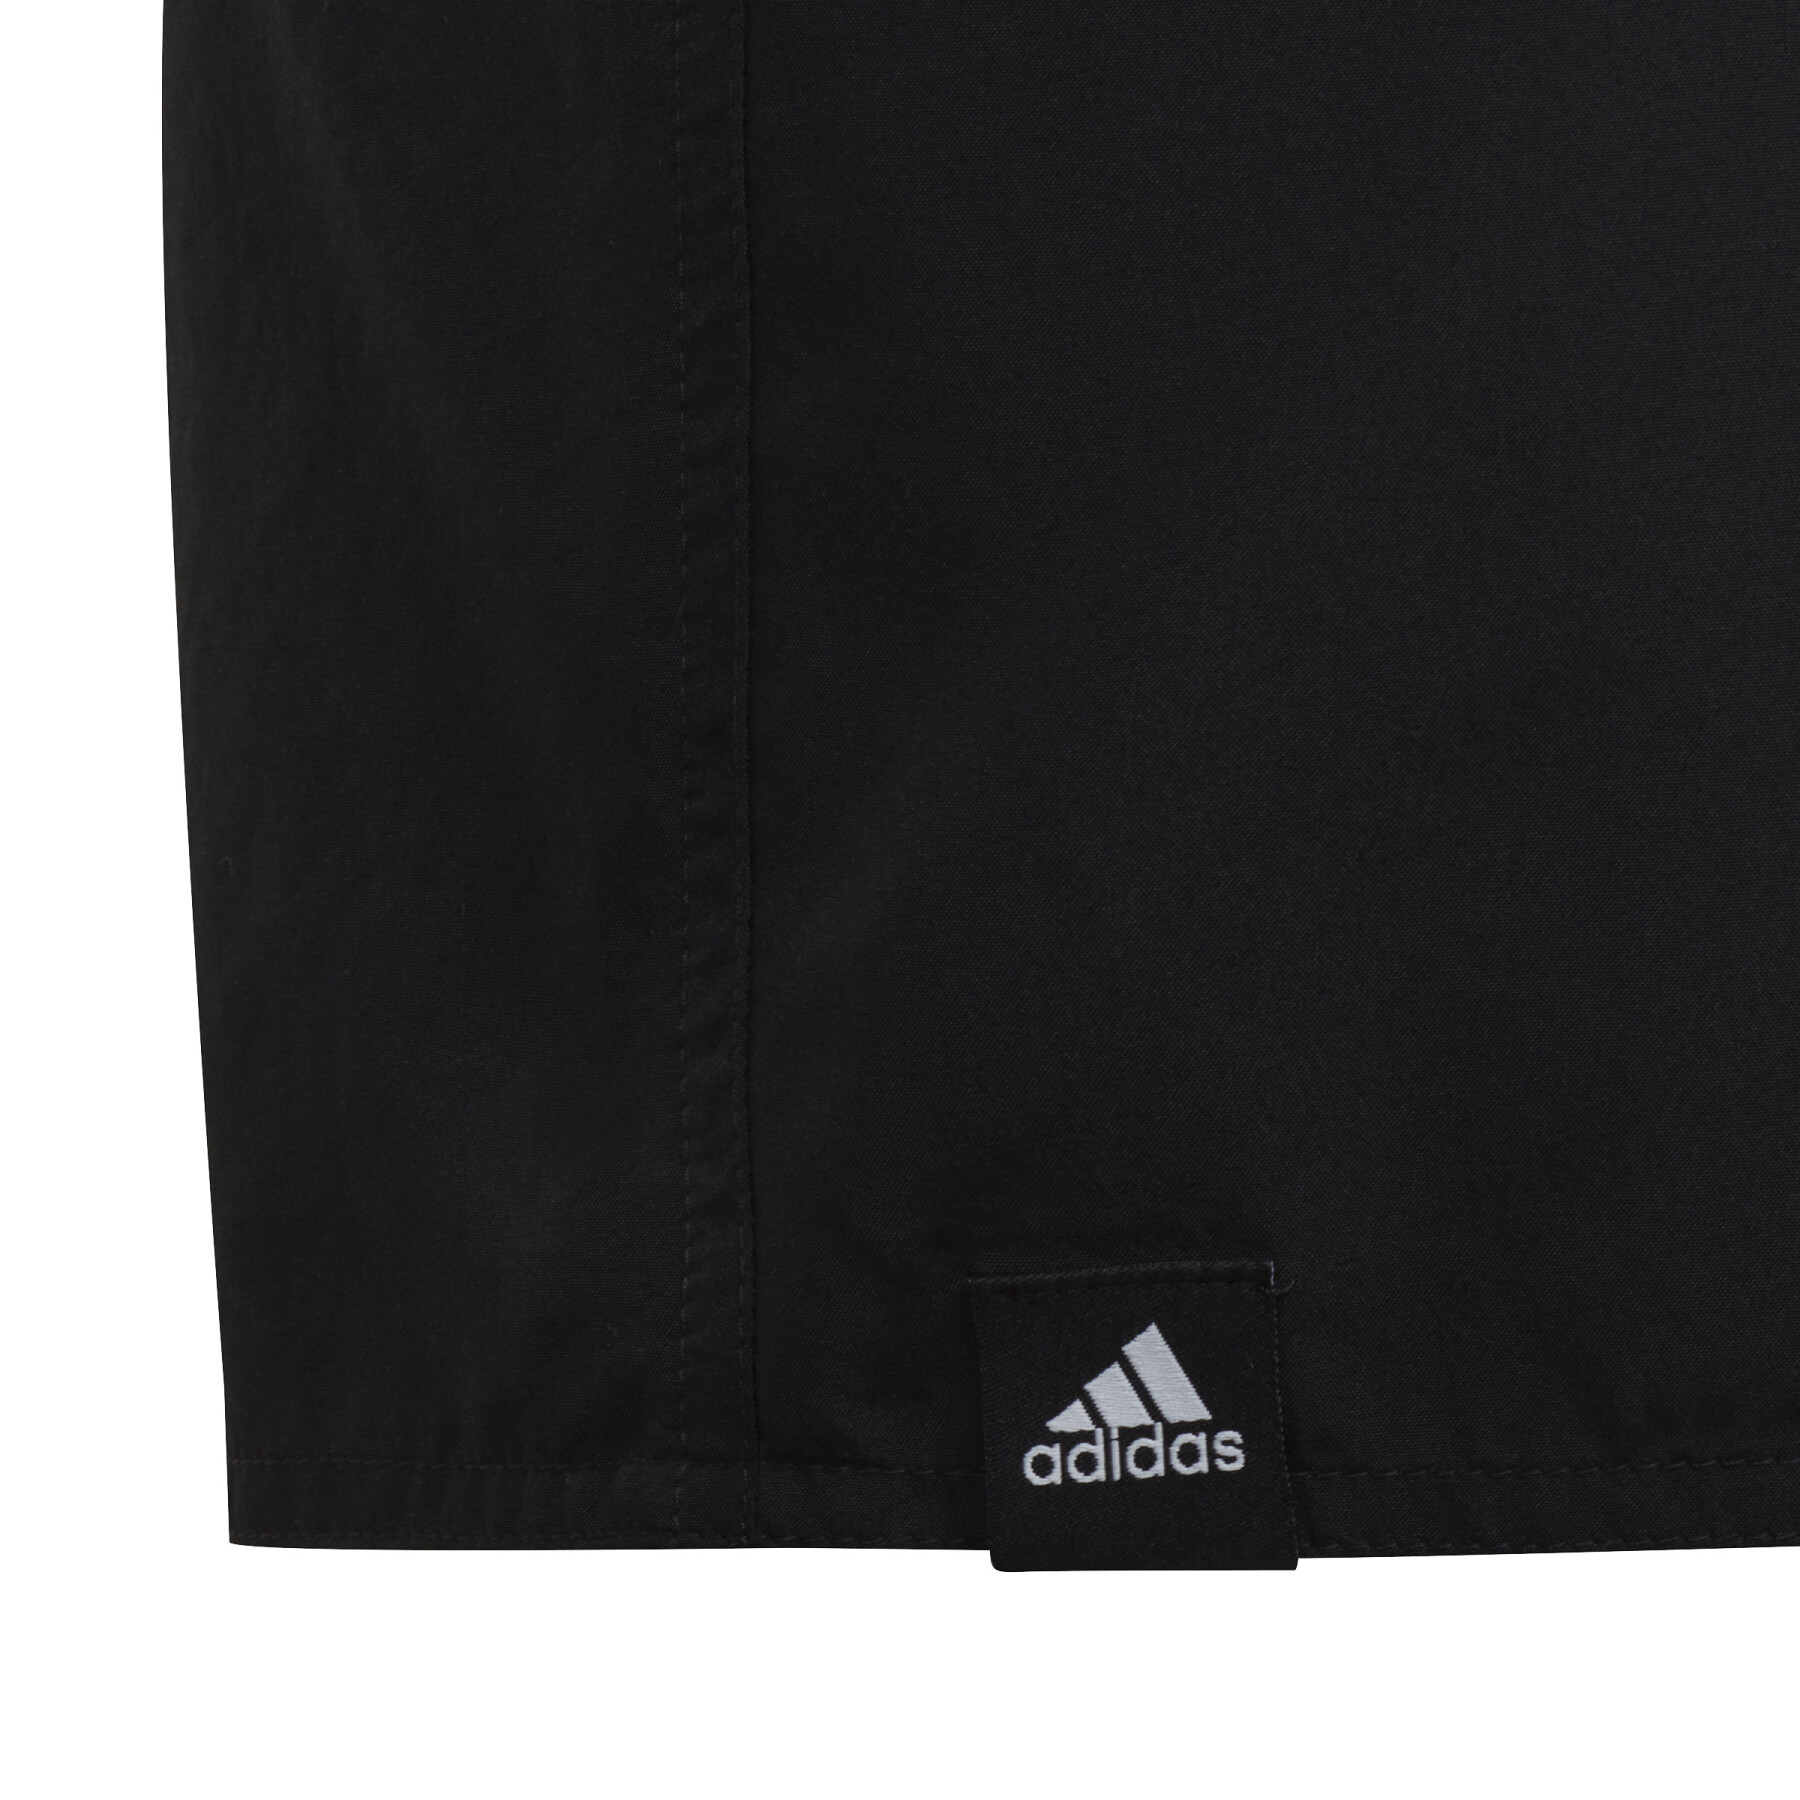 Children's shorts adidas Lineage